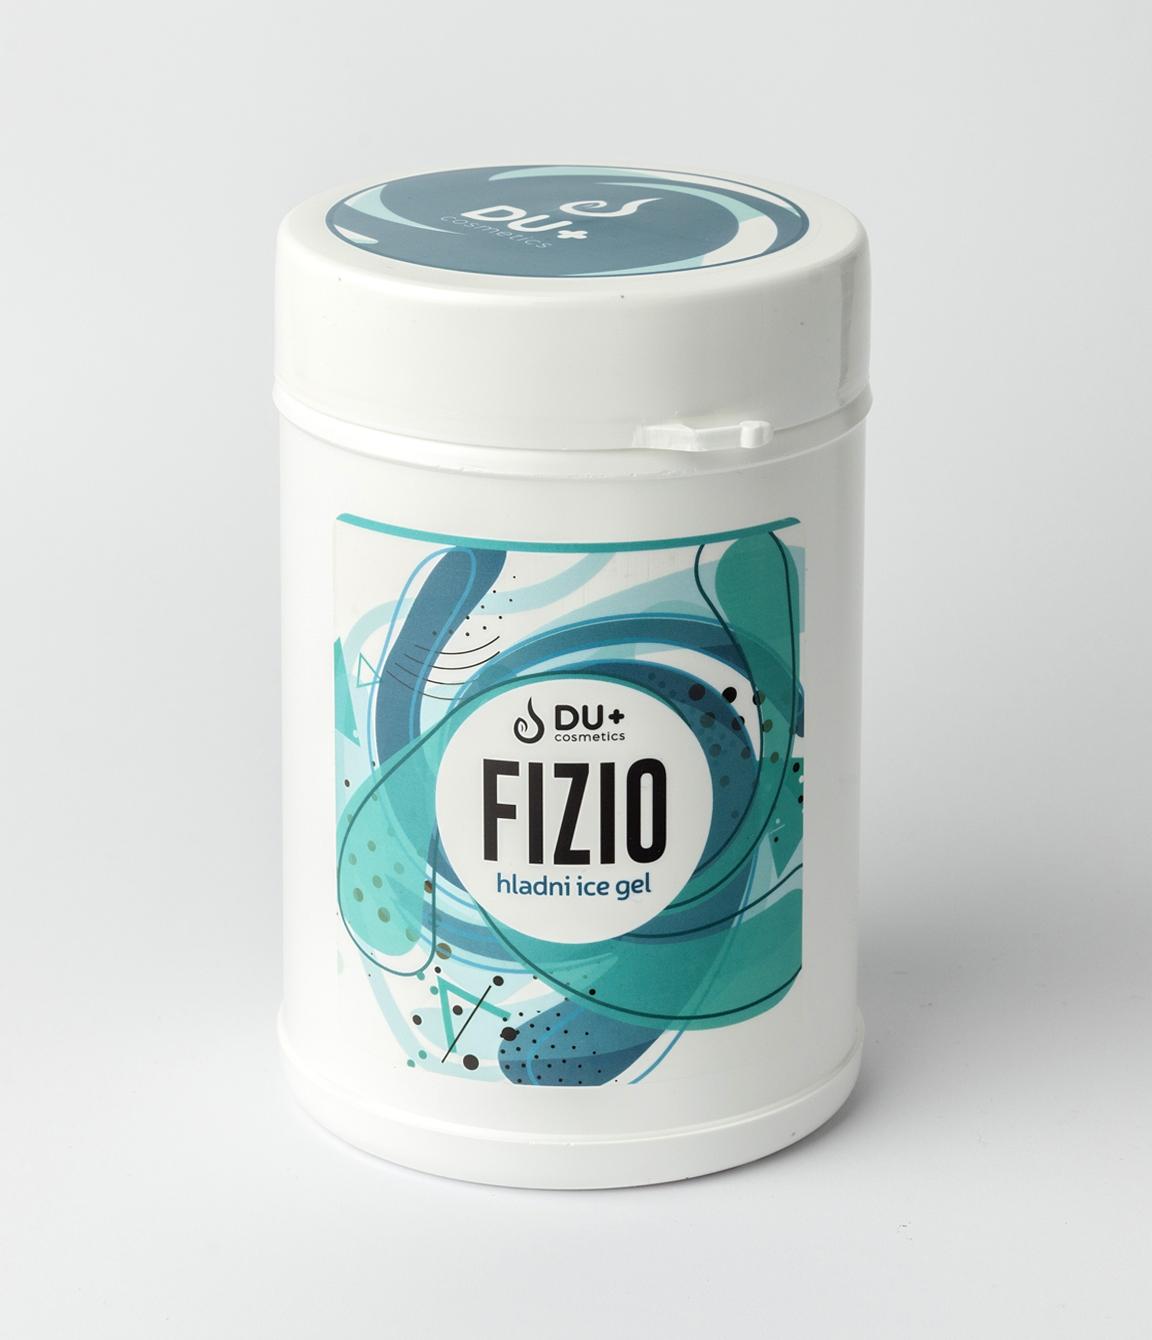 Selected image for Du+ Cosmetics Fizio Hladni ICE gel, 1kg